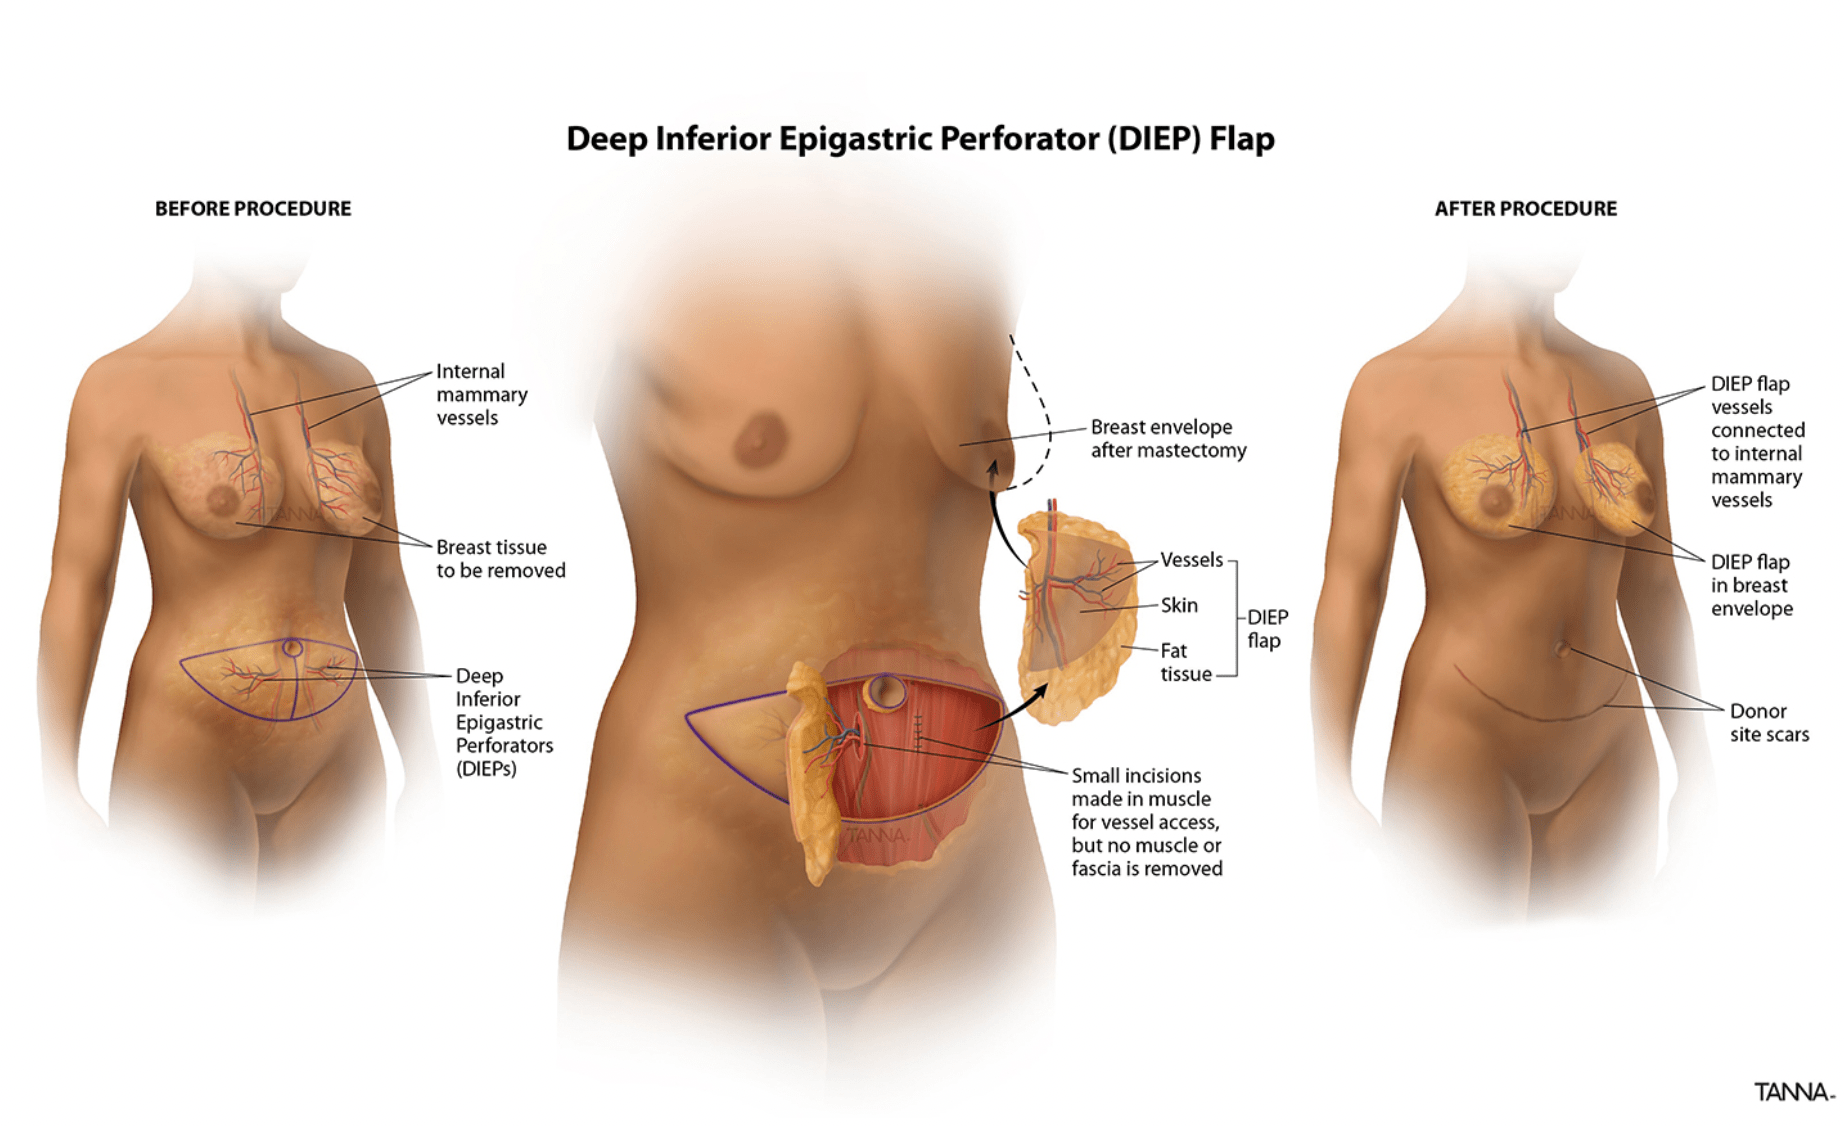 Infographic of a DIEP Flap